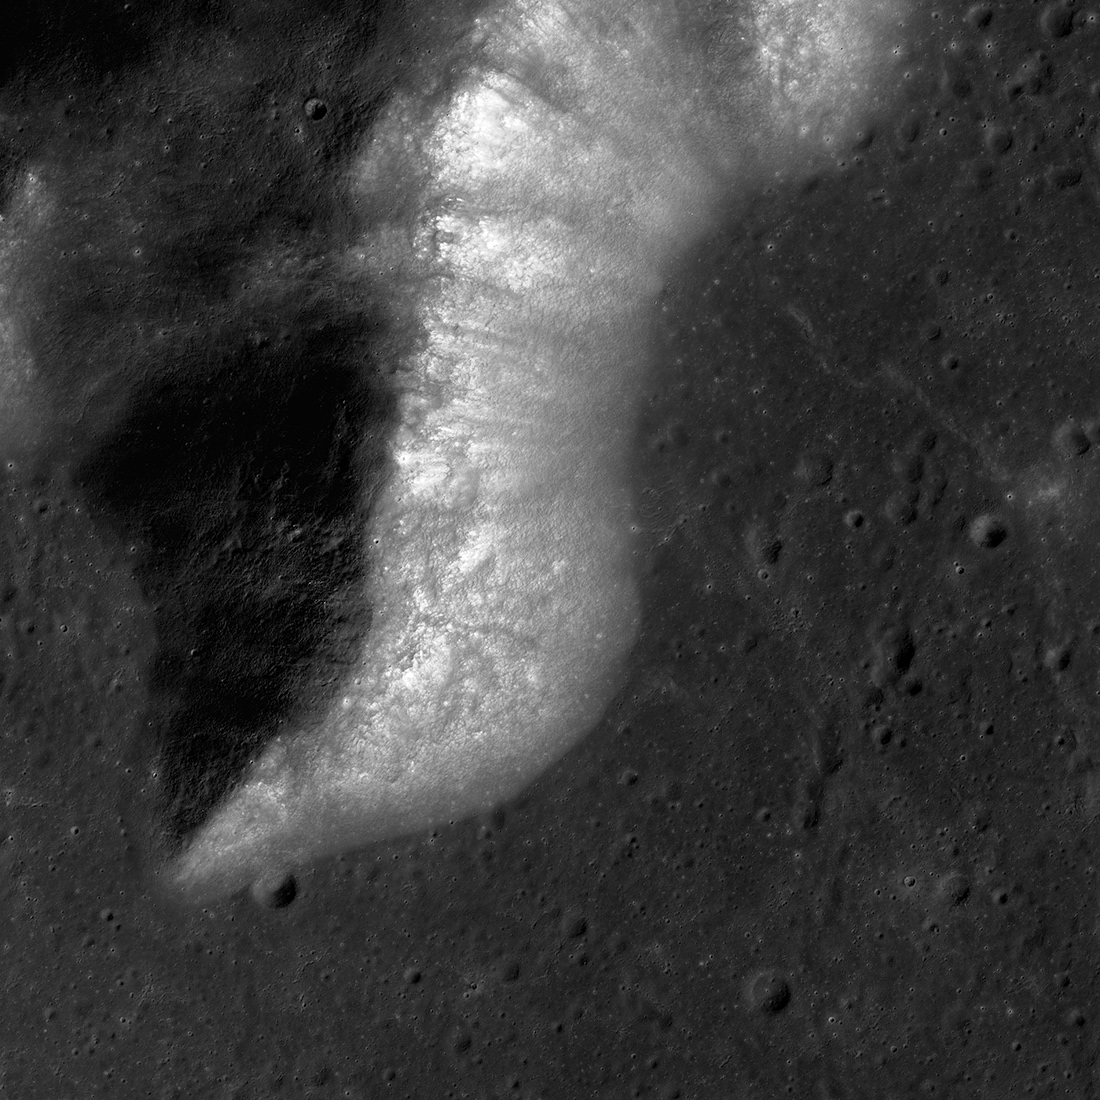 mountain ridge with craters seen from directly above